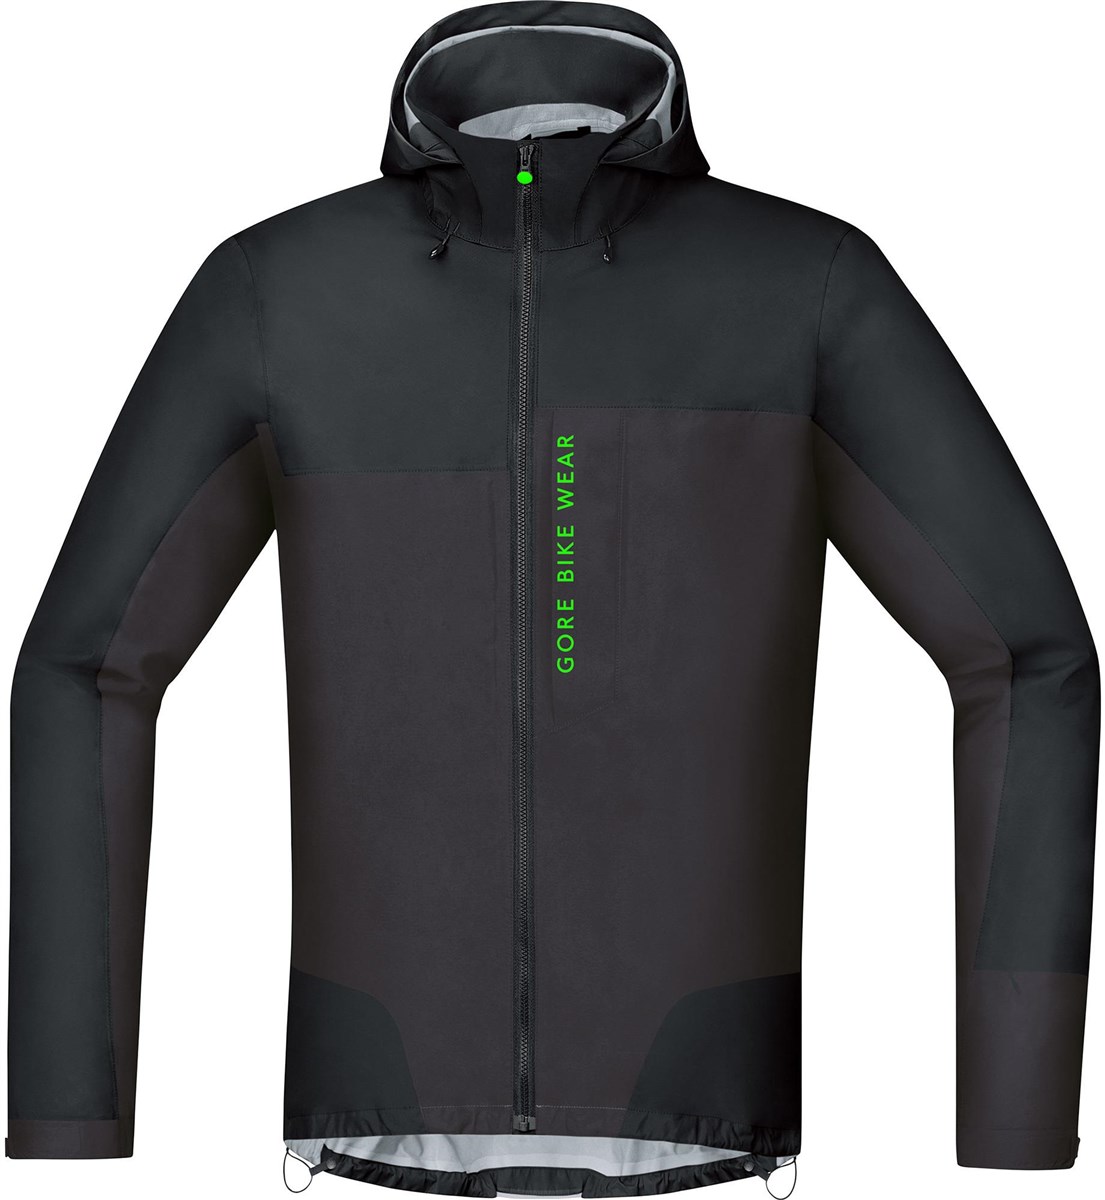 Gore Power Trail Gore-Tex Active Jacket product image